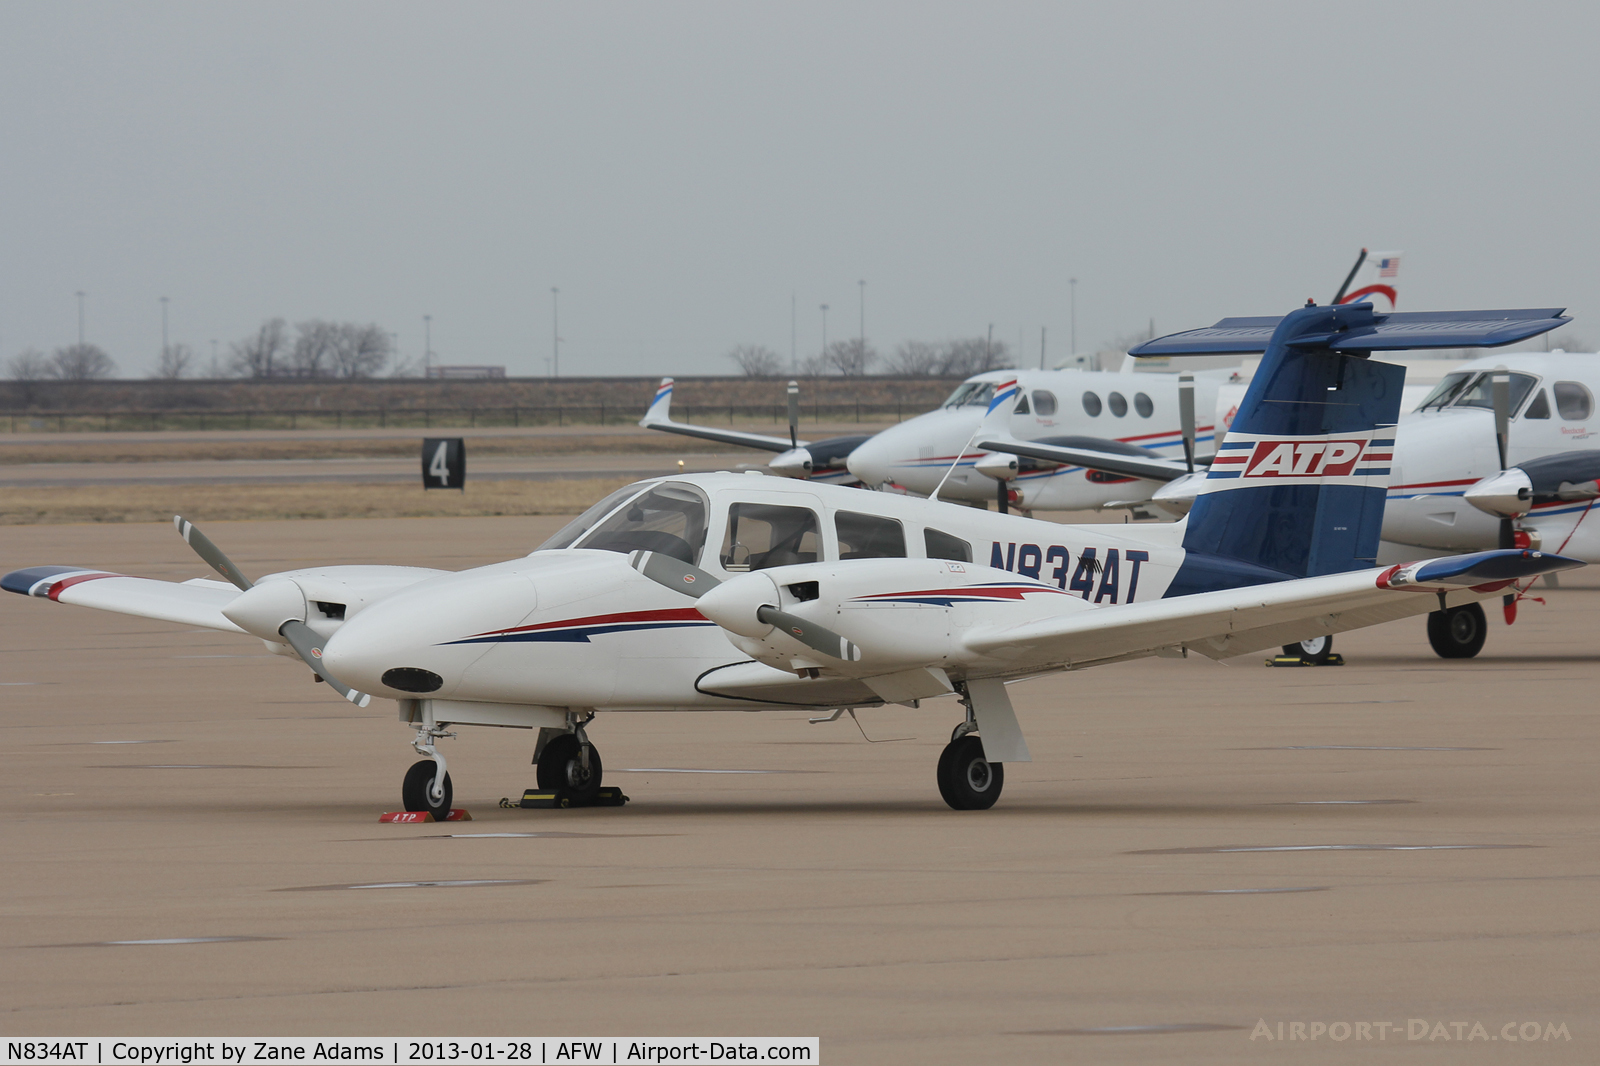 N834AT, 2012 Piper PA-44-180 Seminole C/N 4496314, ATP Twin At Alliance Airport - Fort Worth, TX